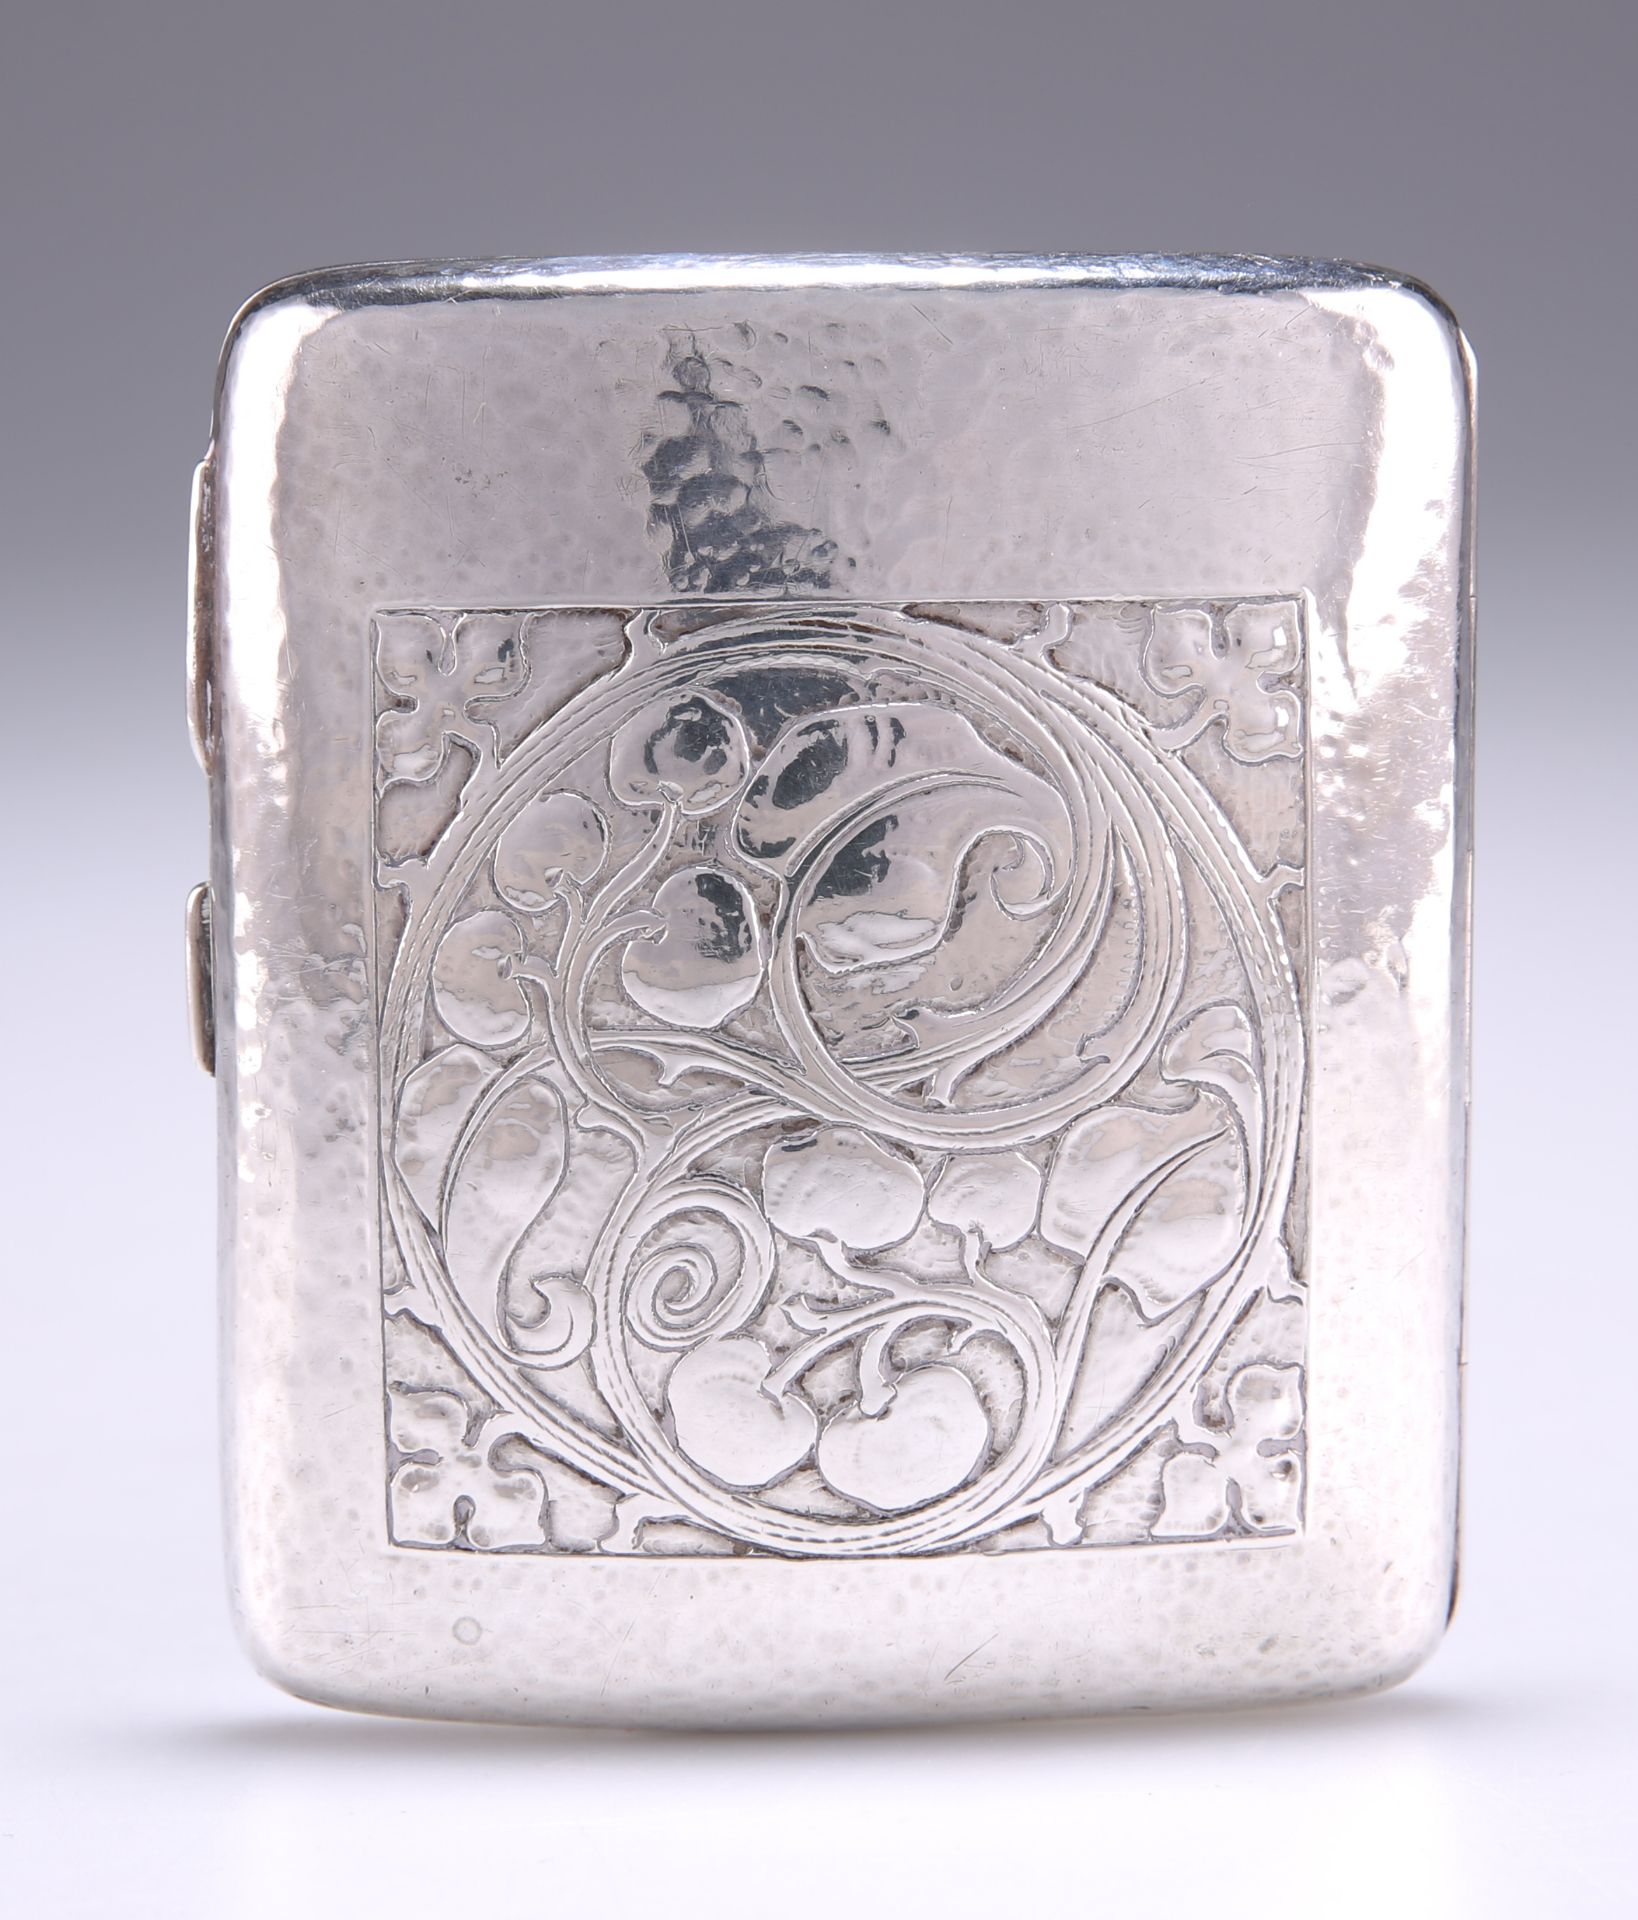 OMAR RAMSDEN & ALWYN CARR, AN ARTS AND CRAFTS SILVER CIGARETTE CASE